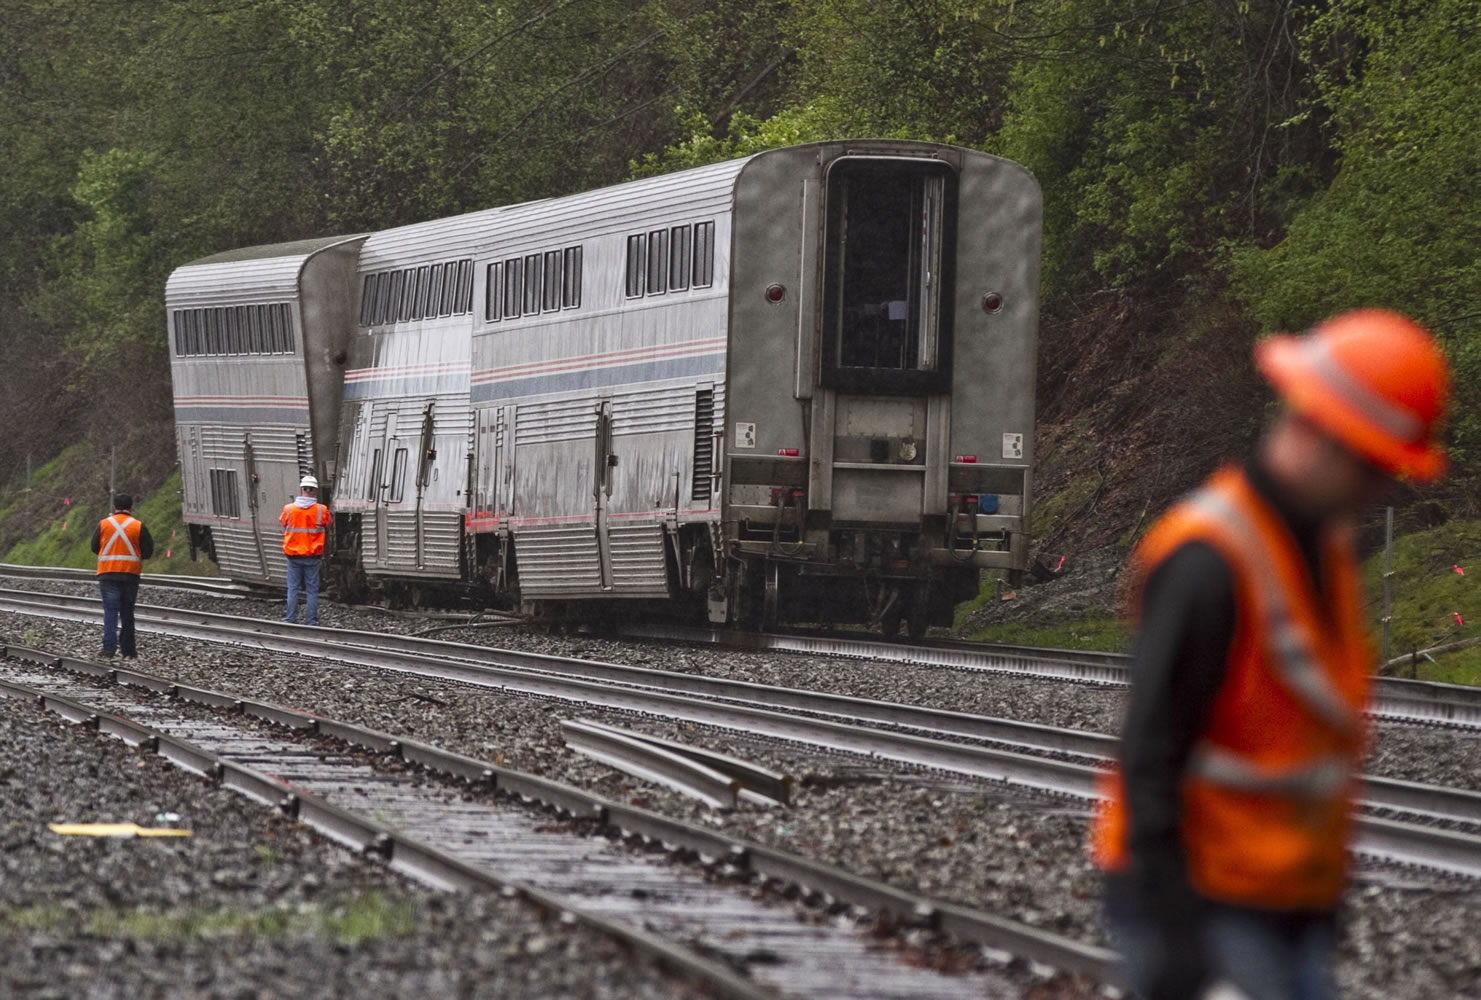 Three cars from an Amtrak train that was carrying passengers sit derailed on a track in Everett after the locomotive portion of the train continued on towards Seattle on Sunday.